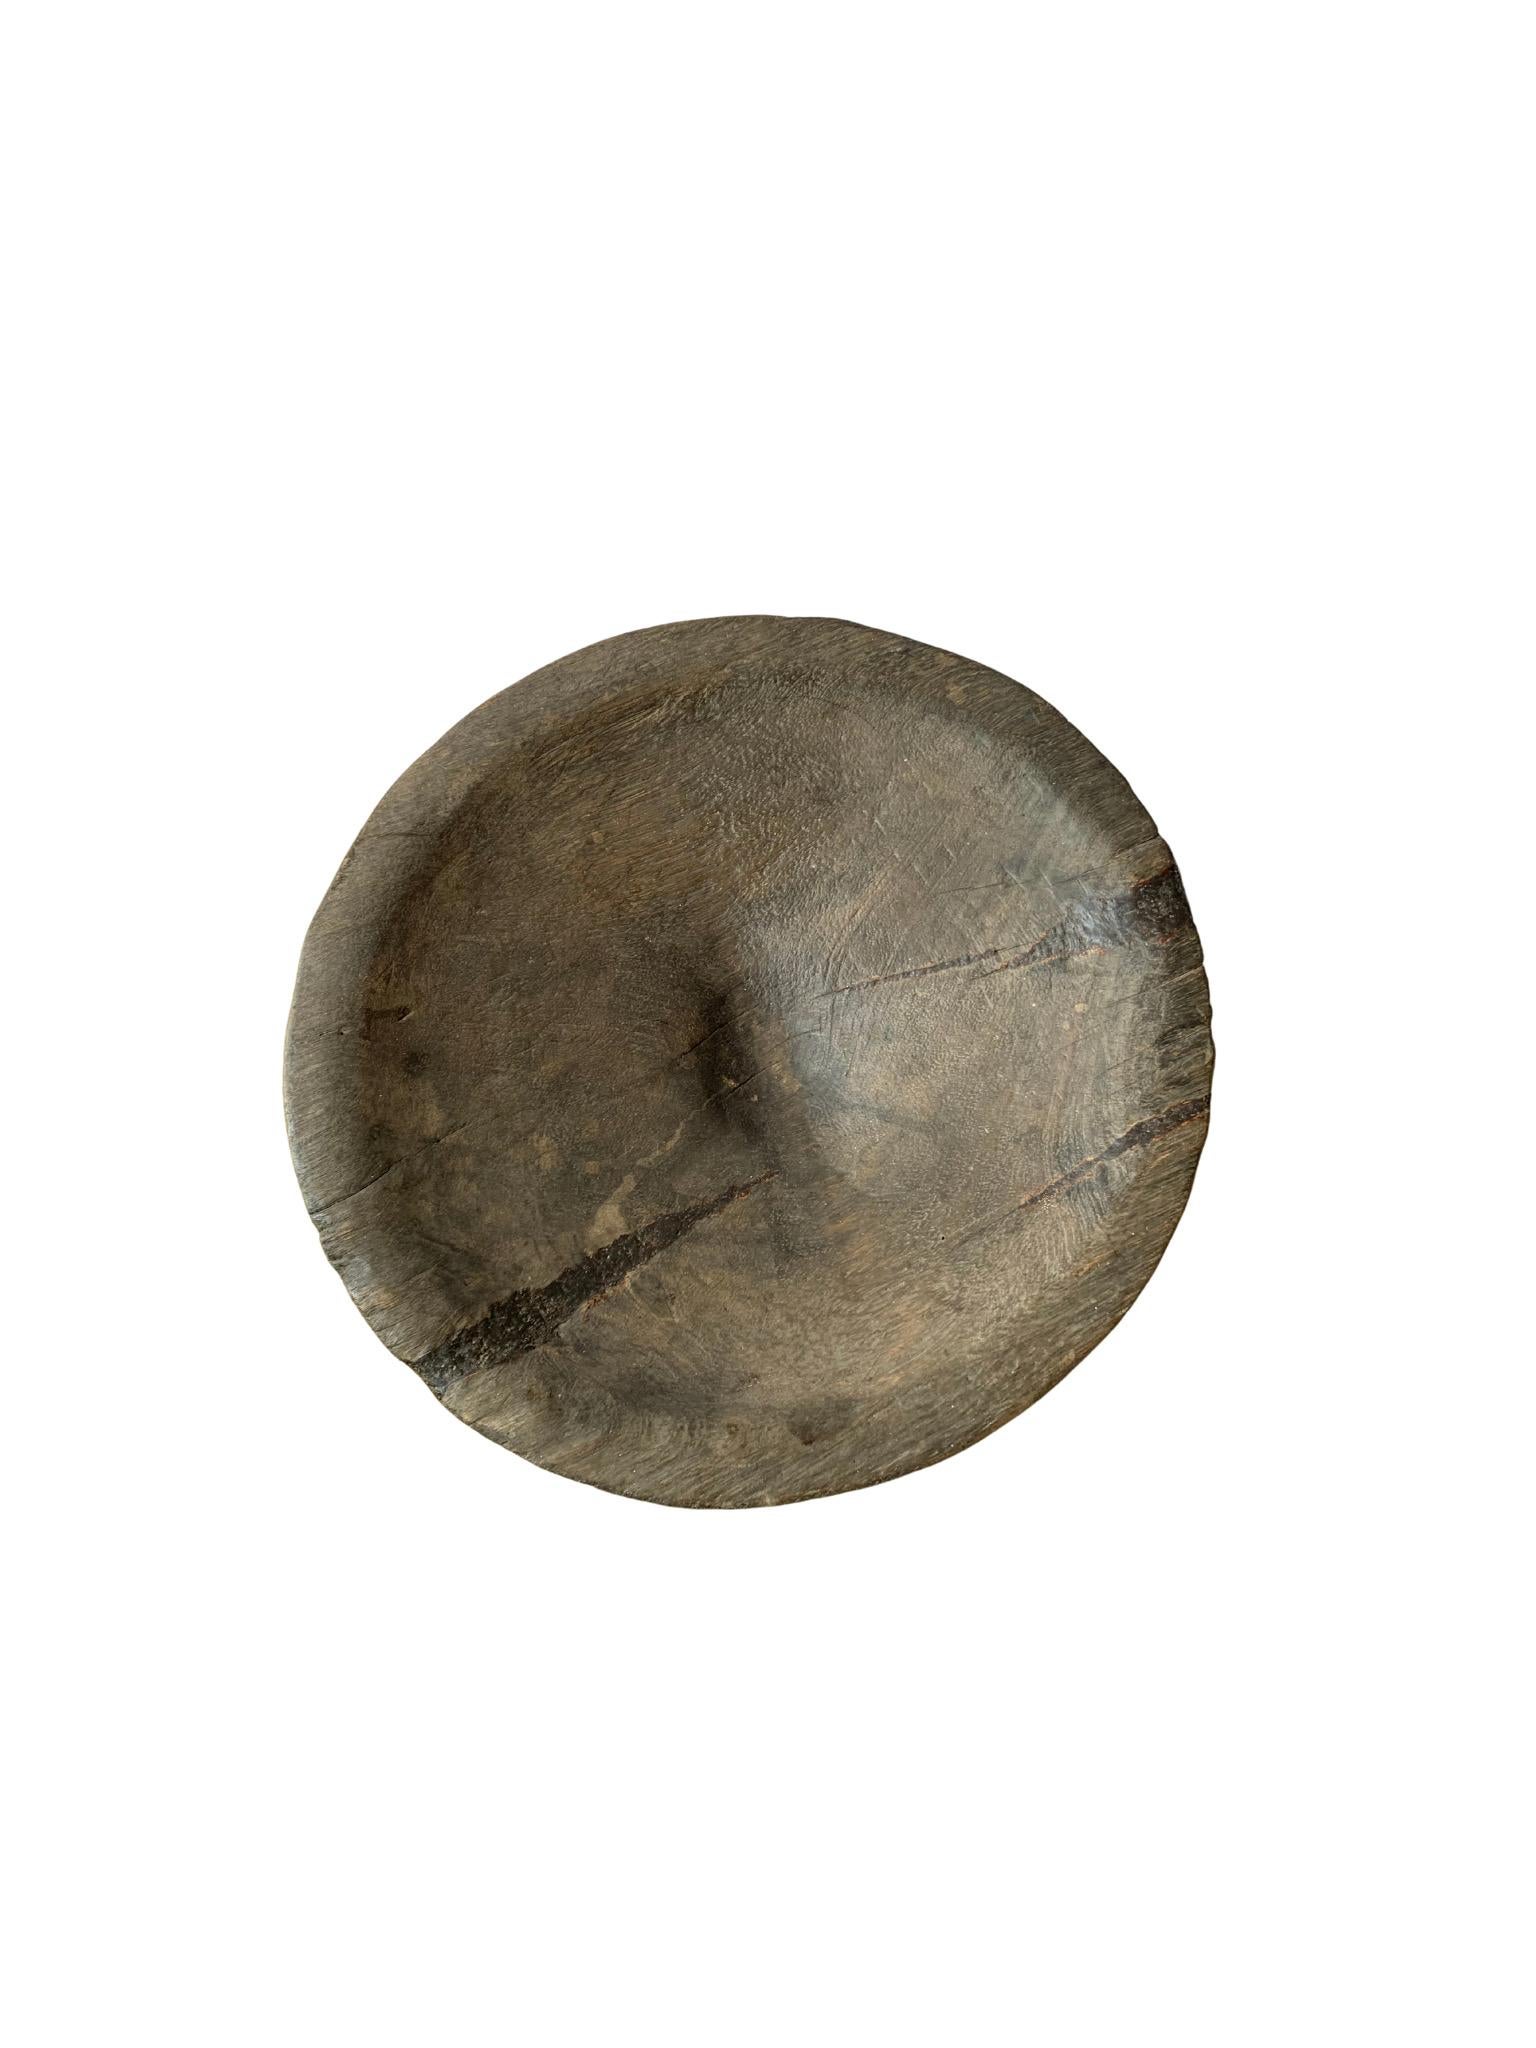 Batak tribe ceremonial bowl from jackfruit wood, early 20th century. The Batak Tribes are ethnic groups predominantly found in North Sumatra, Indonesia. The bowl features a wonderful age related patina and mix of wood textures. 

